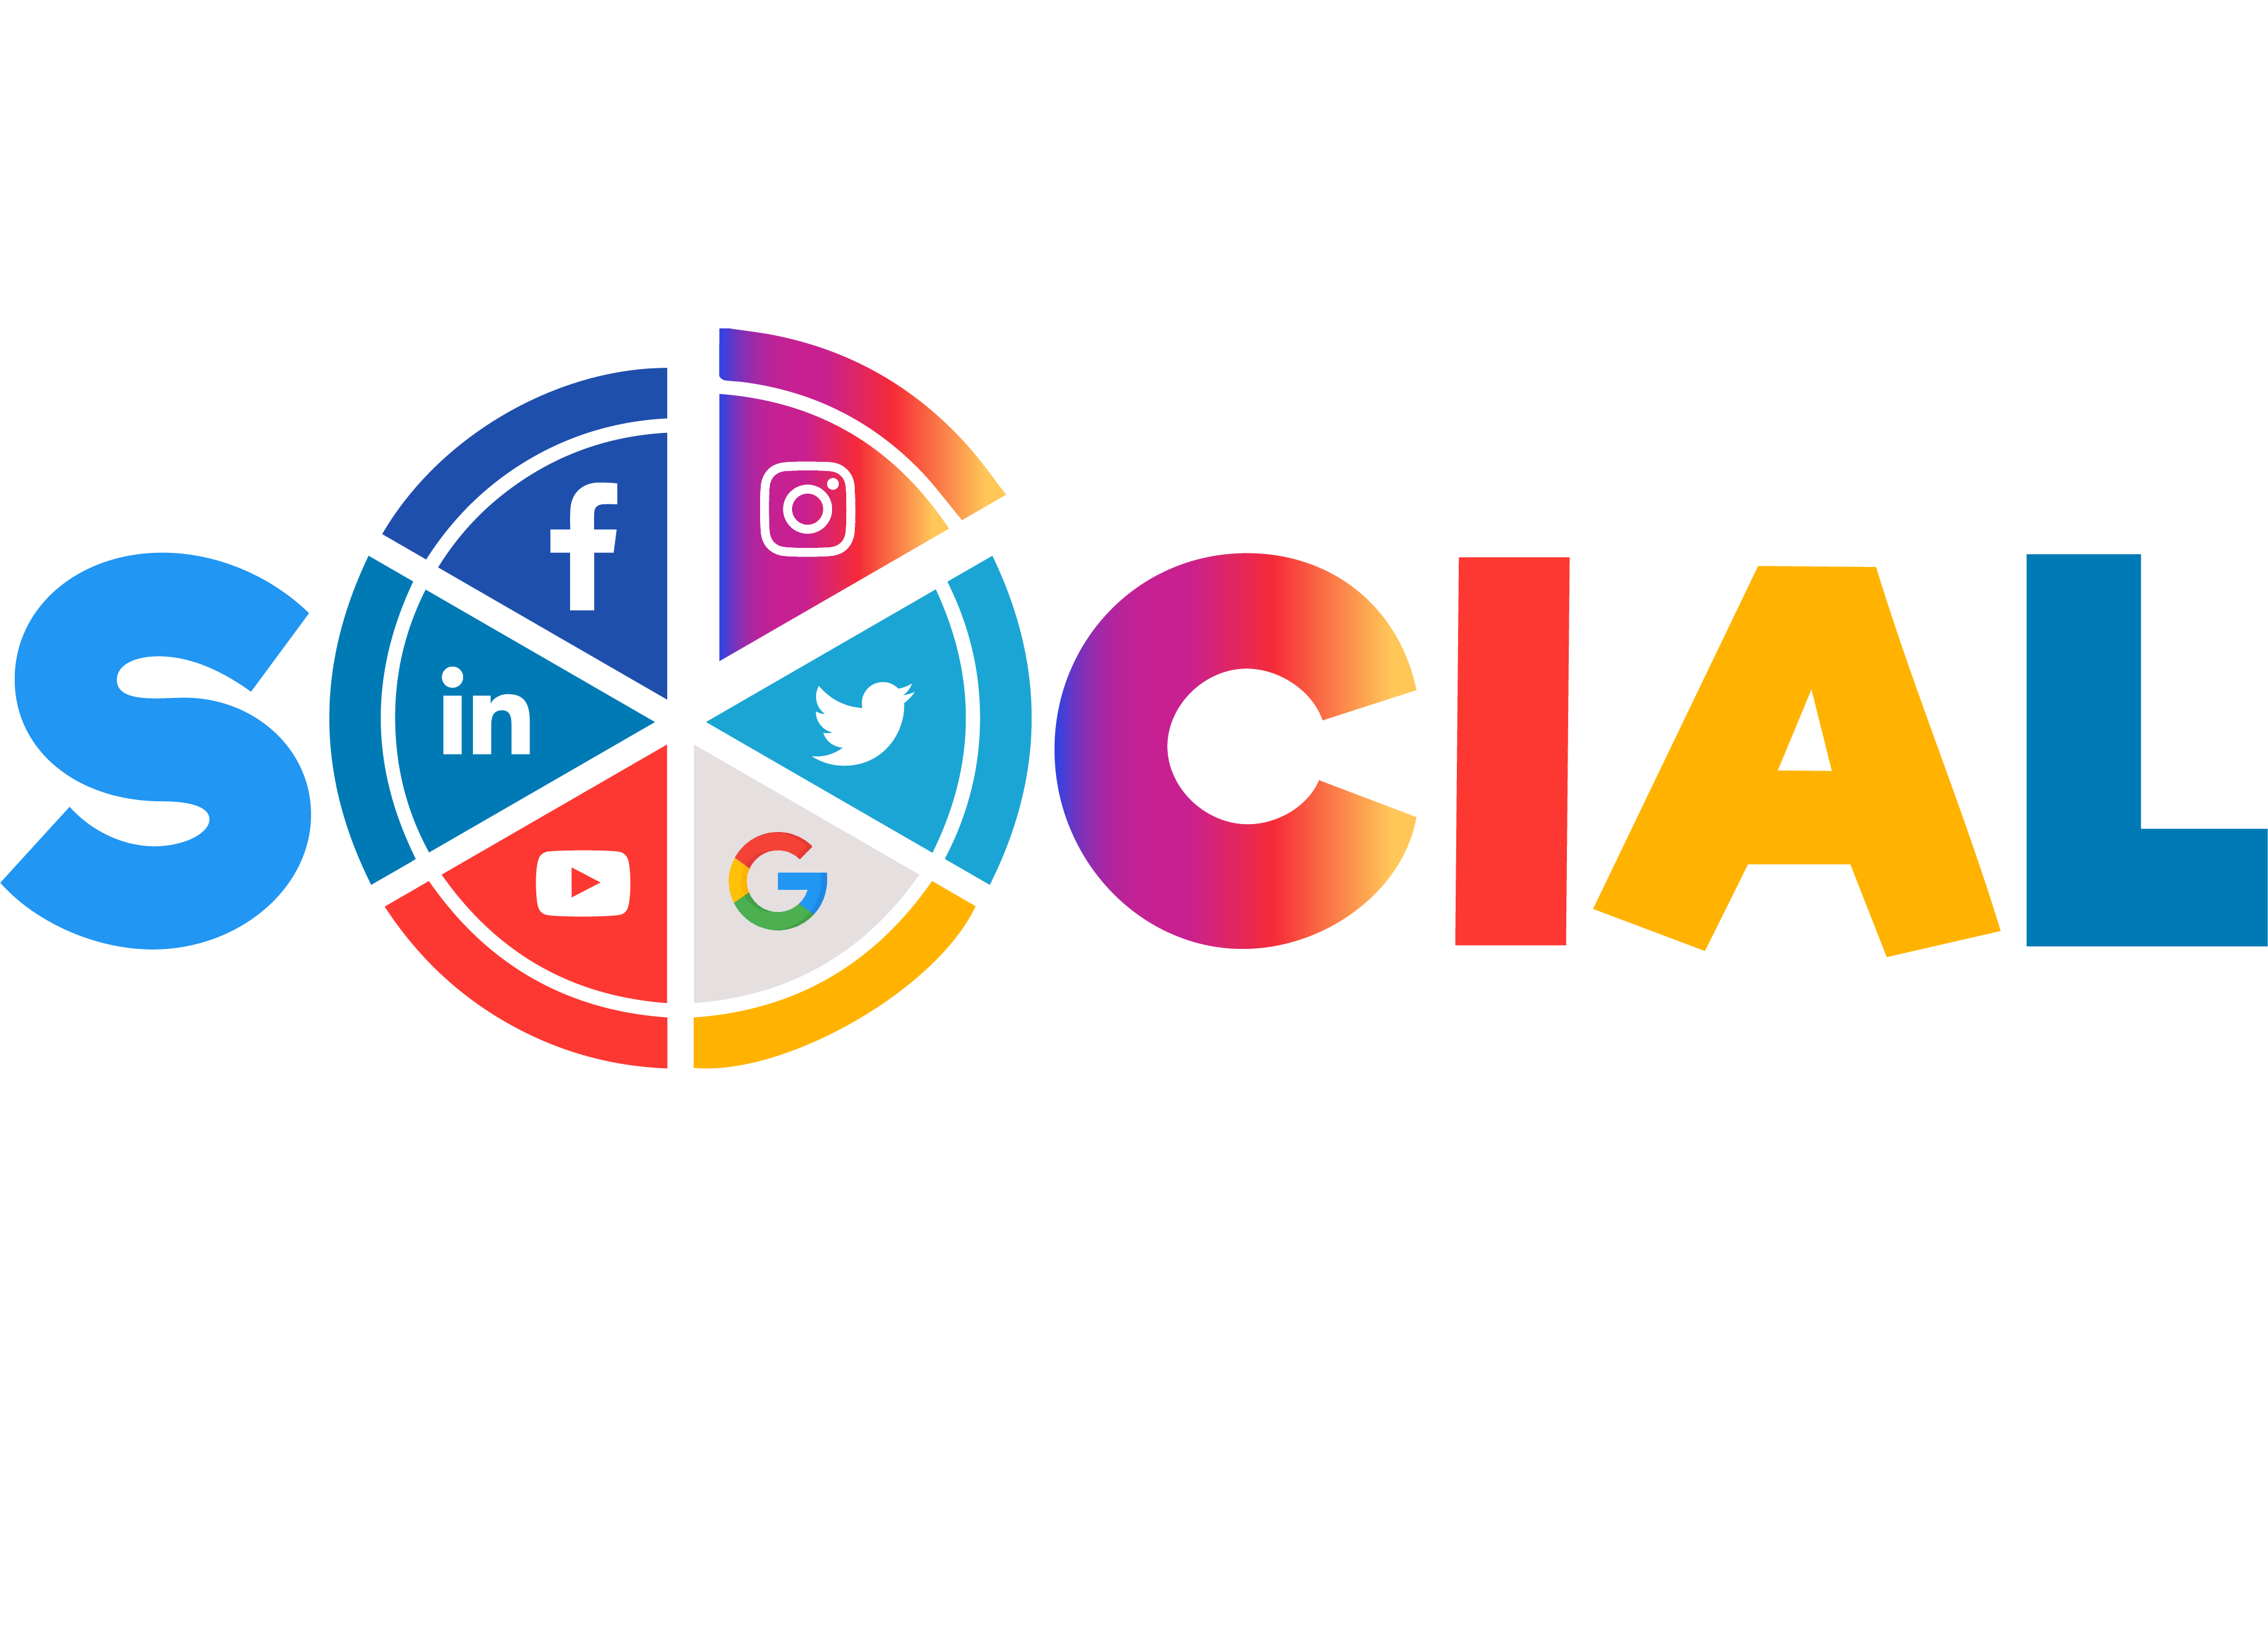 TheSocialToppings